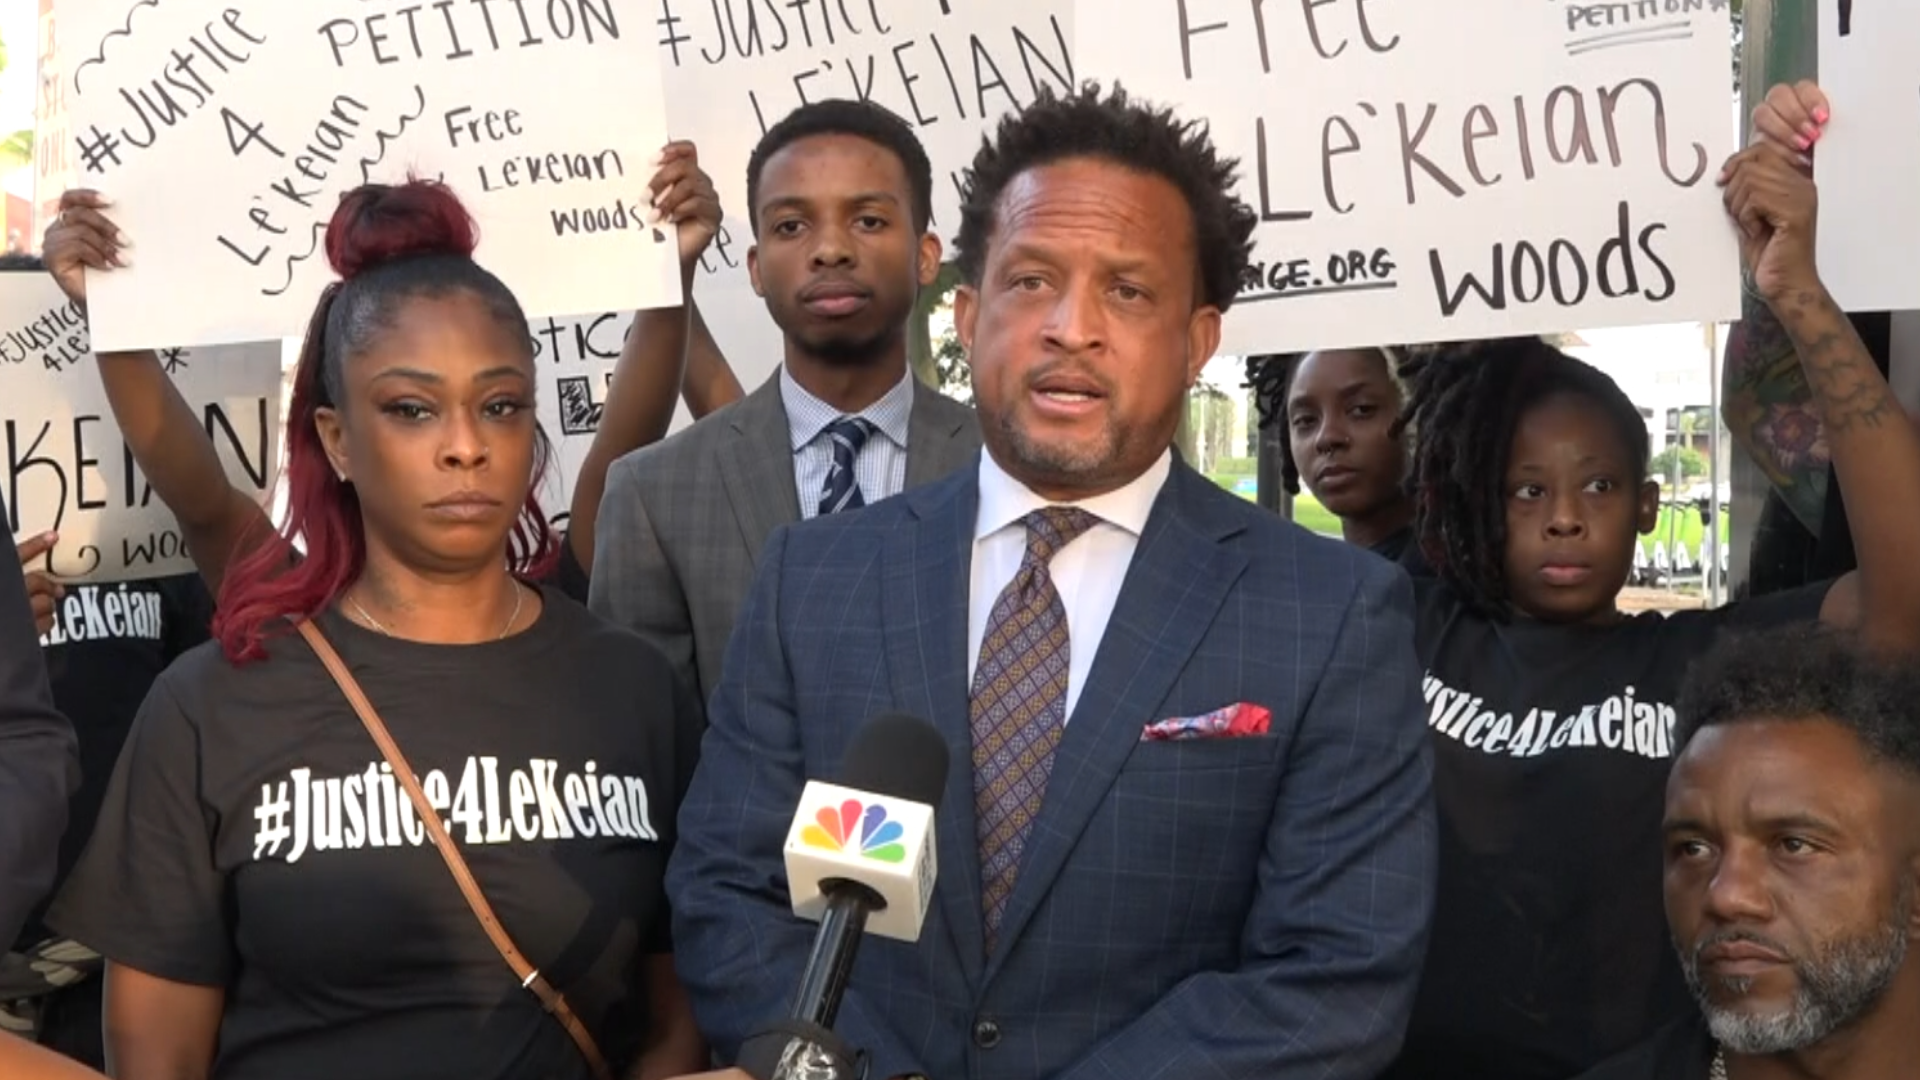 Le’Keian Woods's mother, Natassia Woods and his attorney, Marwan Porter, spoke out after bodycam footage of his arrest was released.